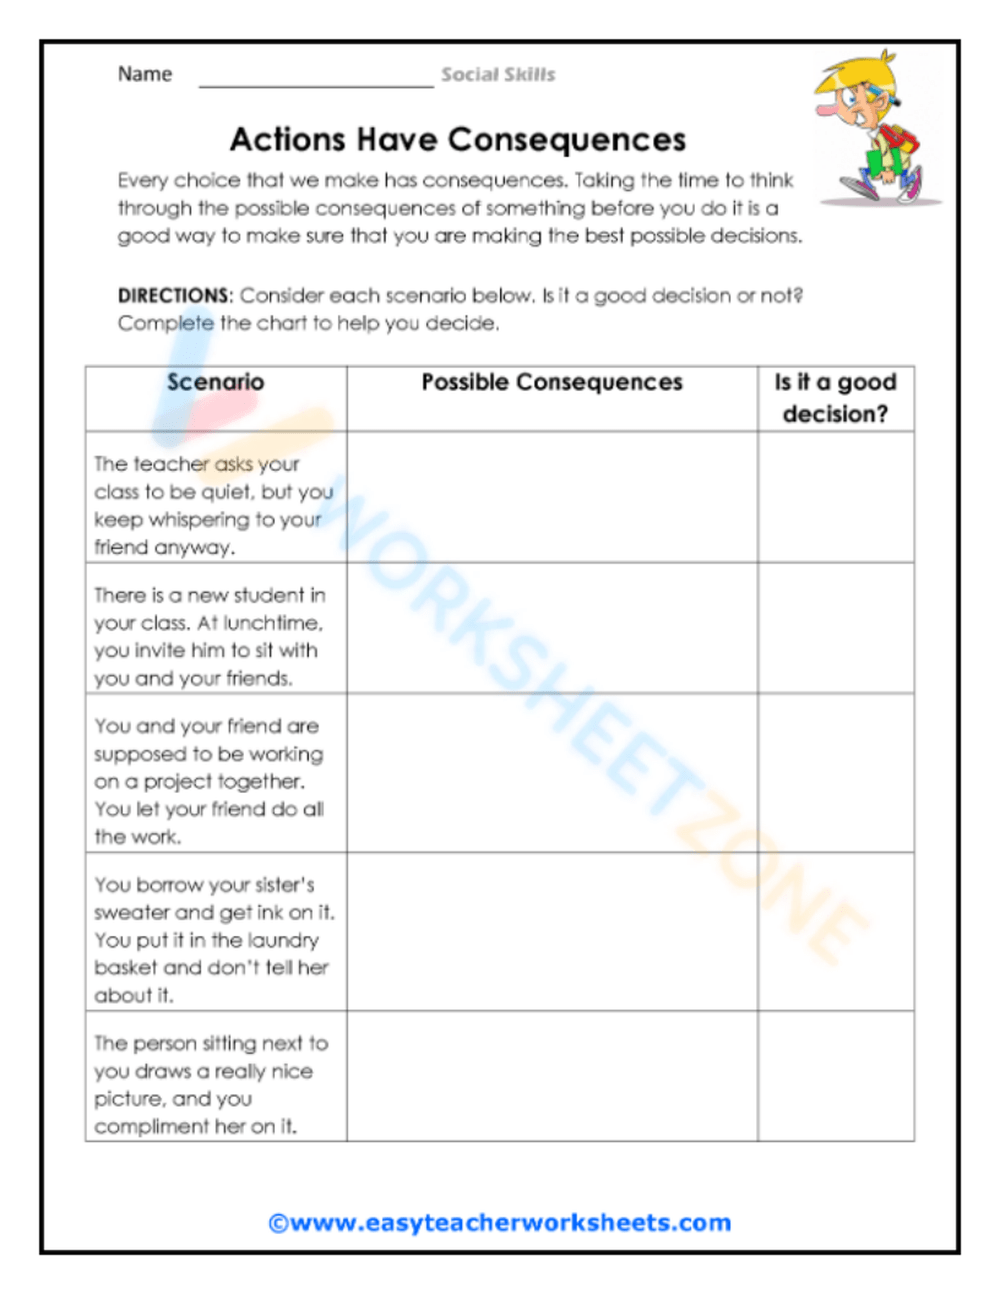 Free Social Skills For Middle School Worksheets